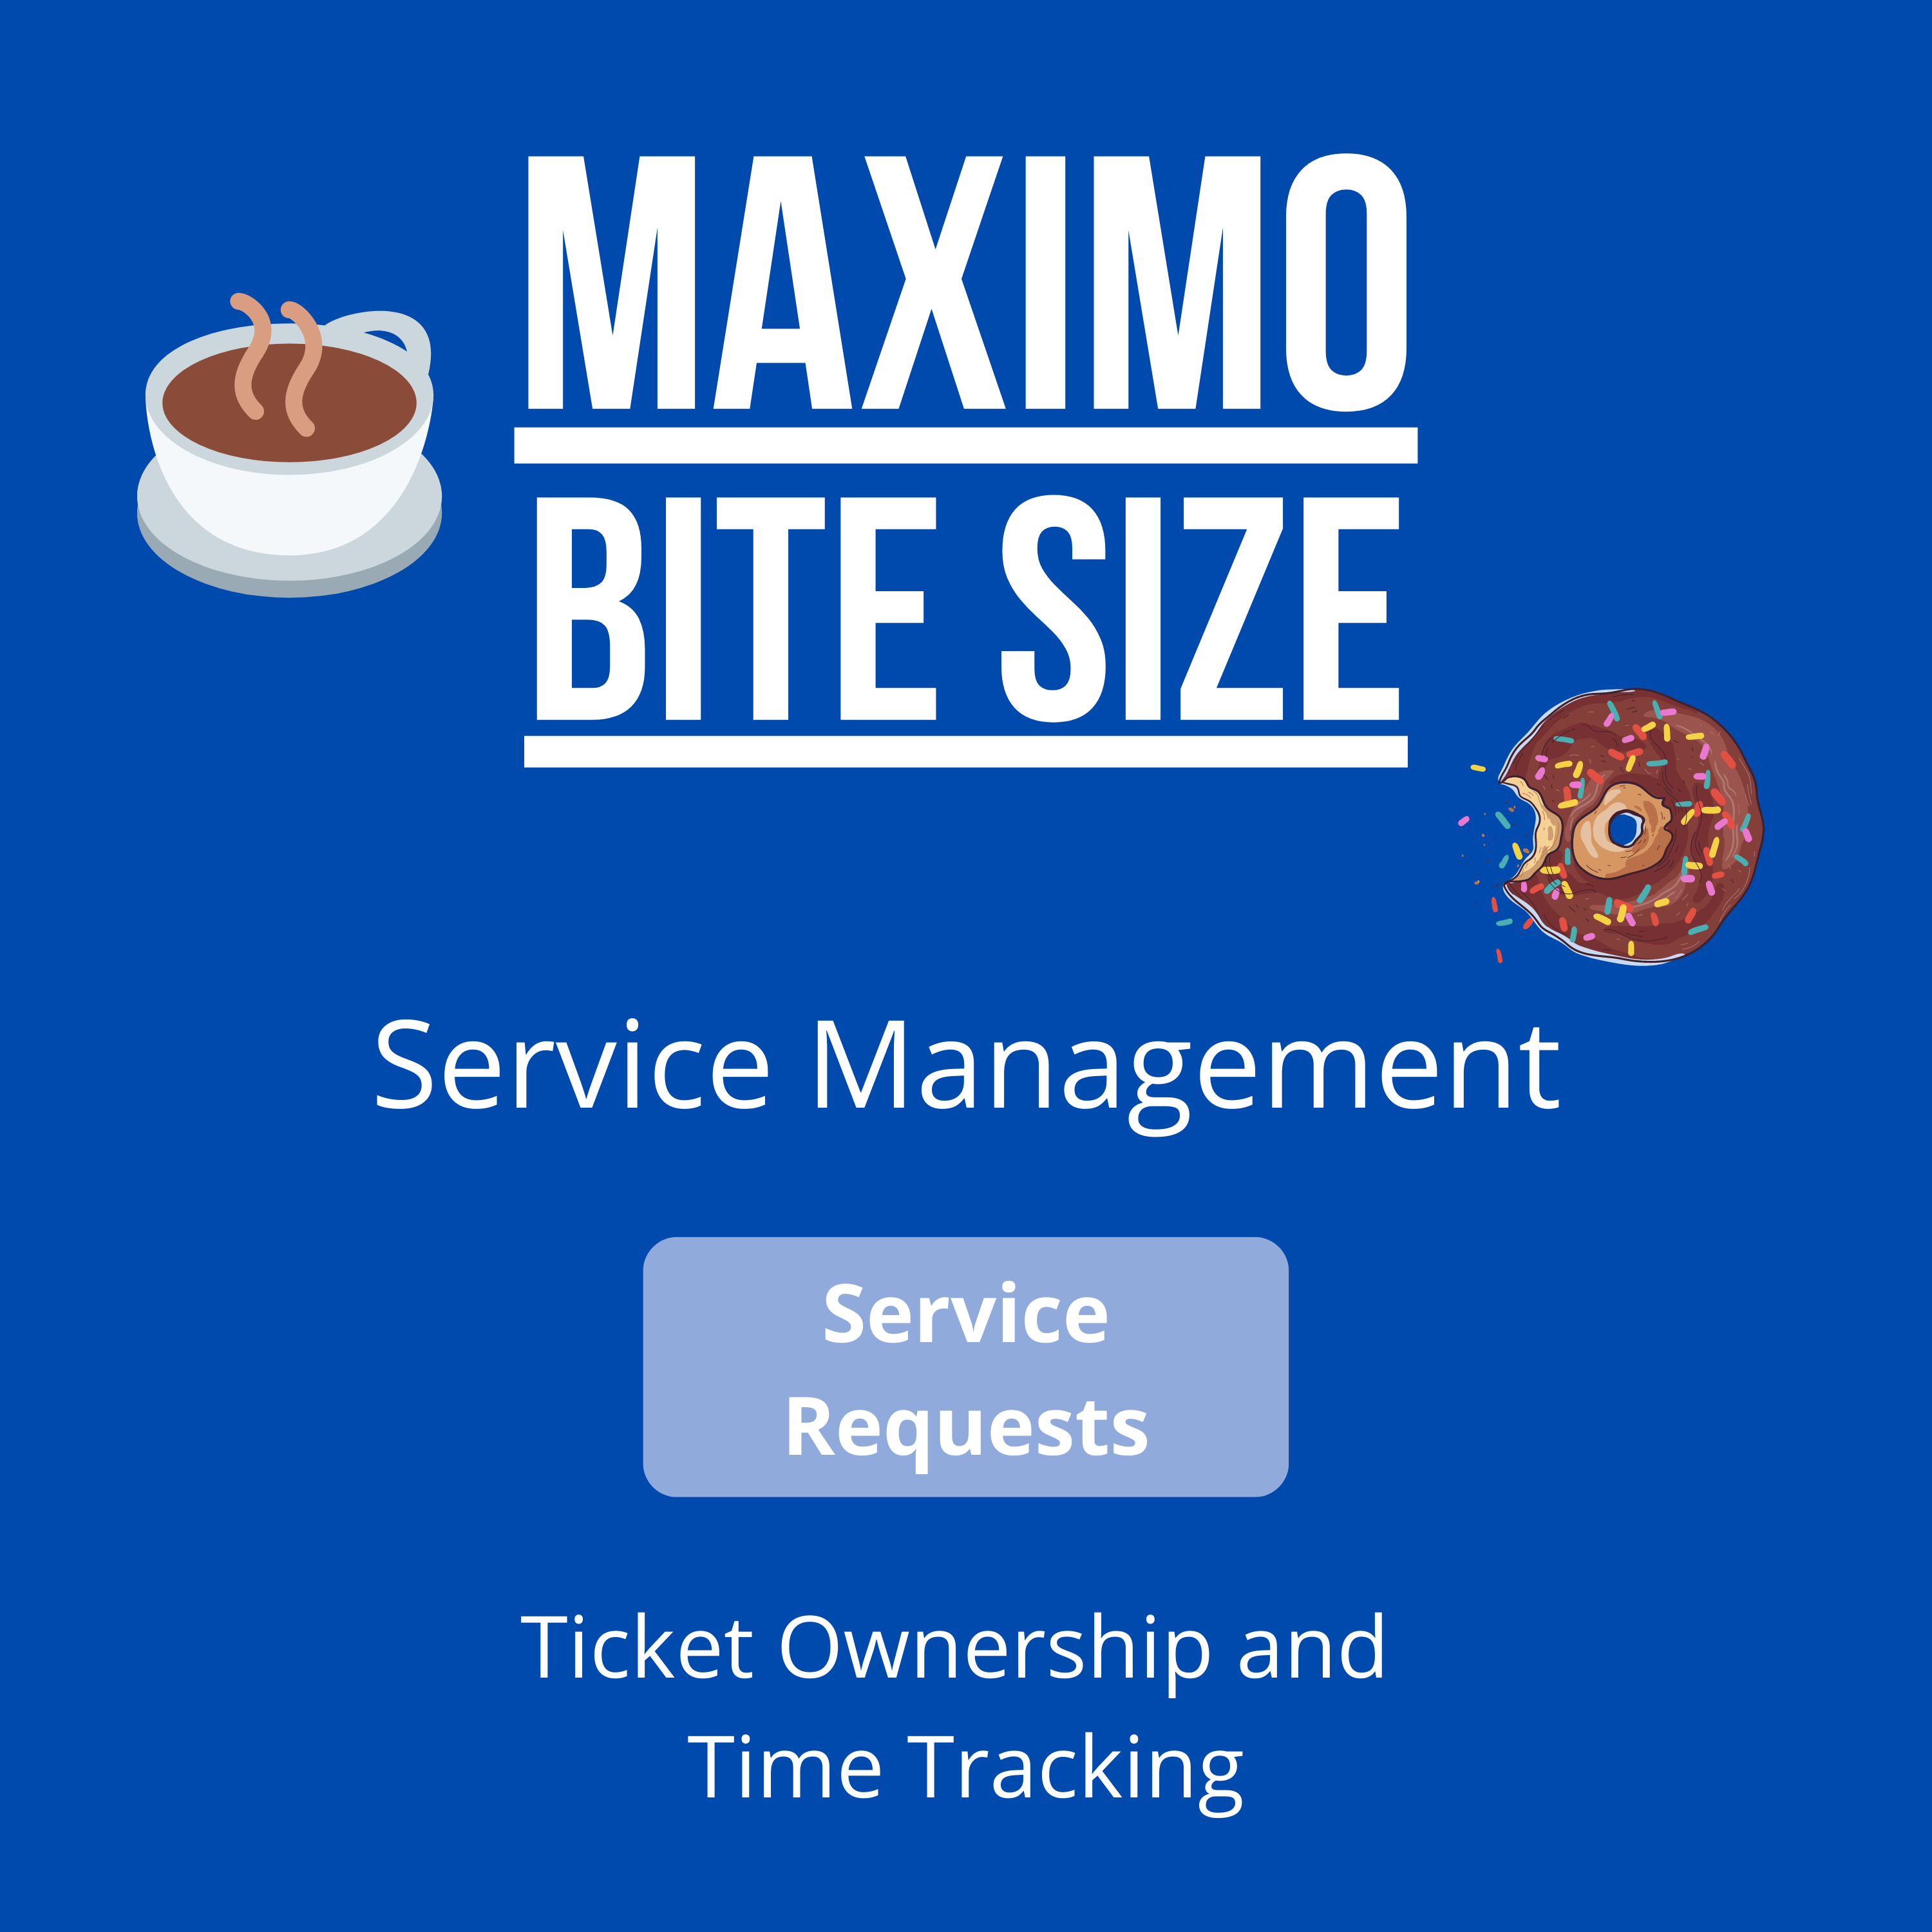 Ticket Ownership and Time Tracking